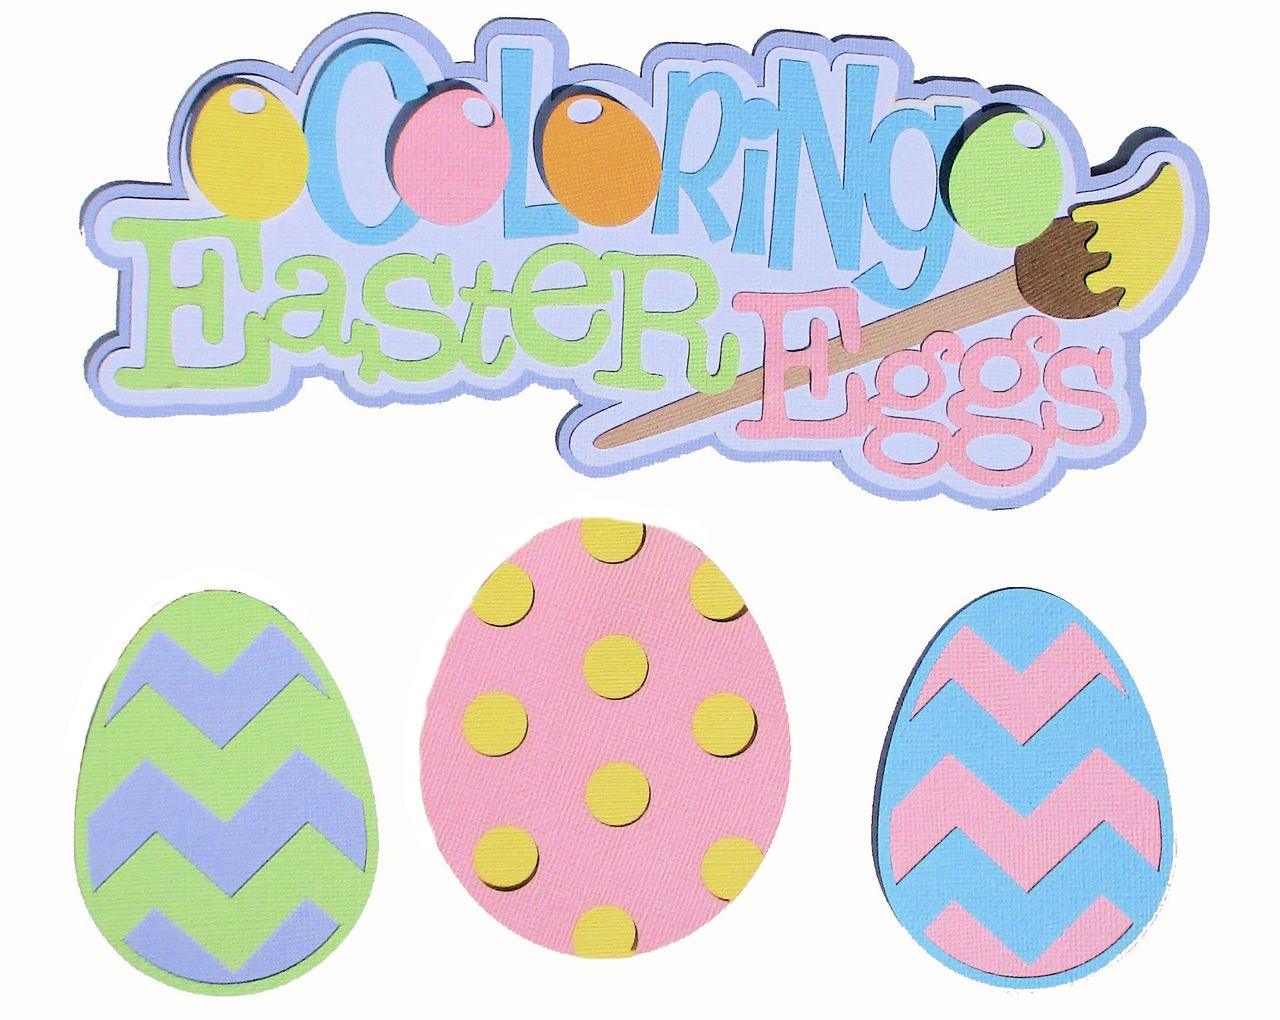 Coloring Easter Eggs 4 x 9 Title & Coordinating Easter Eggs Laser Cut Scrapbook Embellishments by SSC Laser Designs